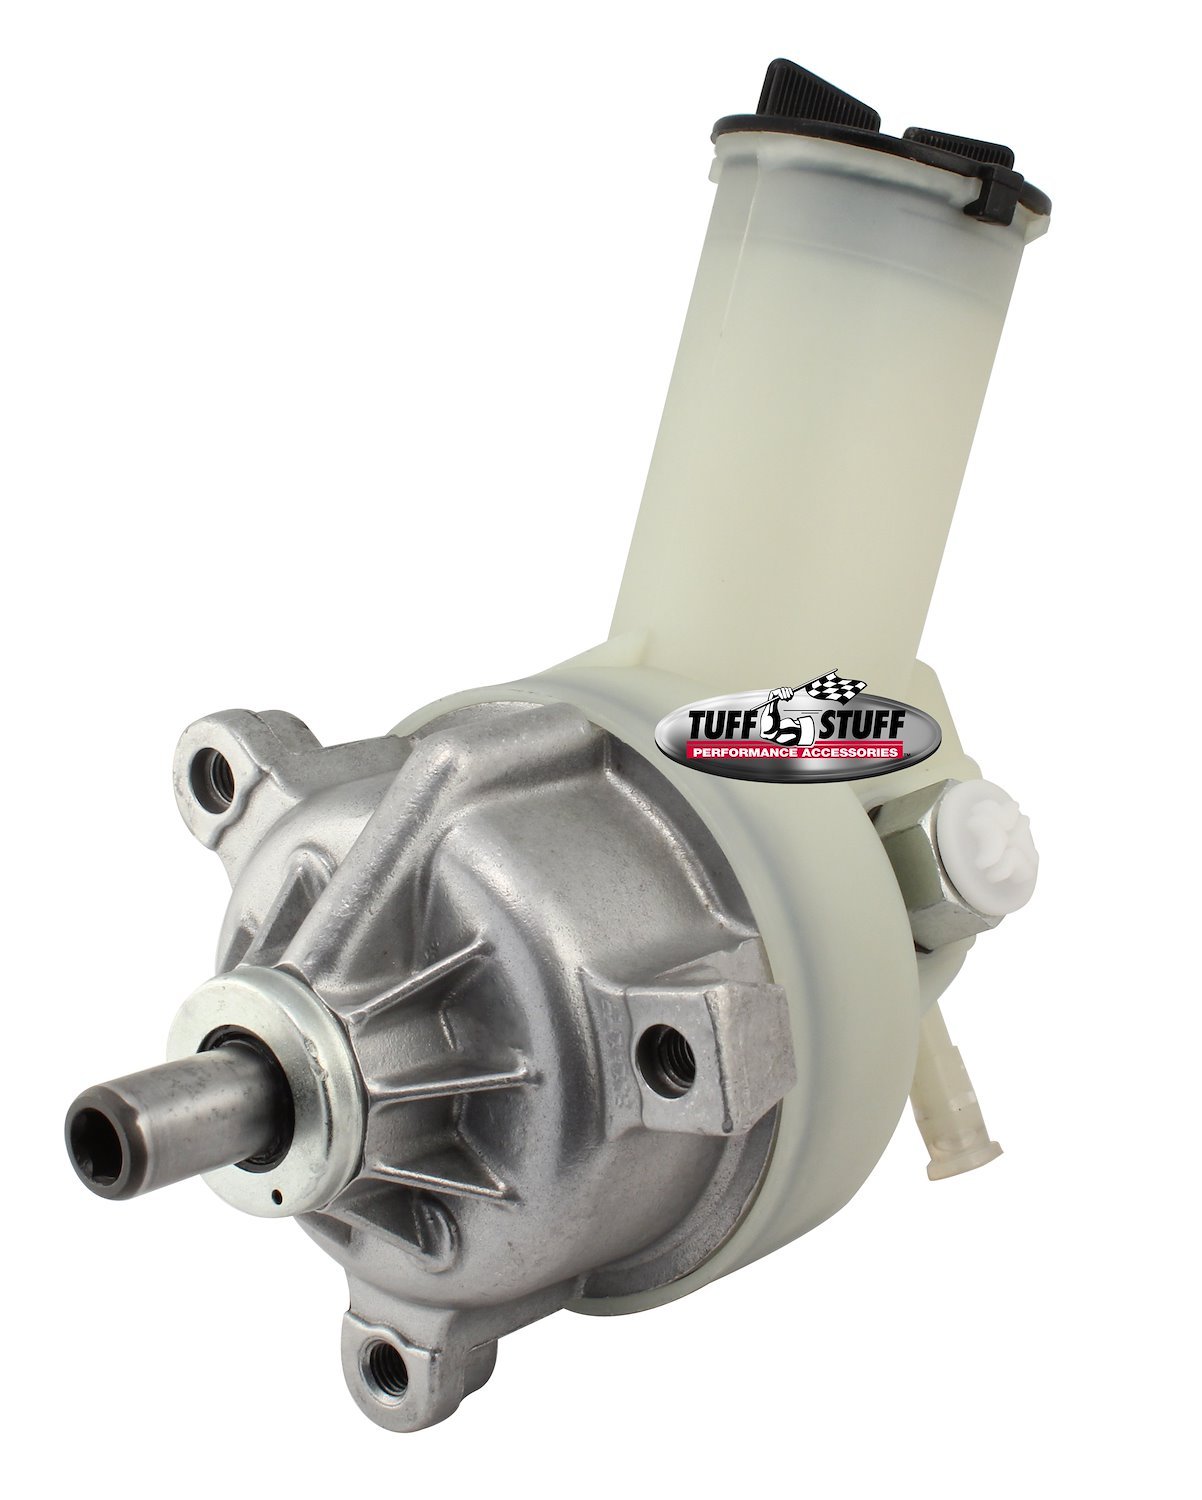 Direct-Fit, OE-Style Power Steering Pump Ford Explorer/Mustang/Thunderbird, Mercury Cougar